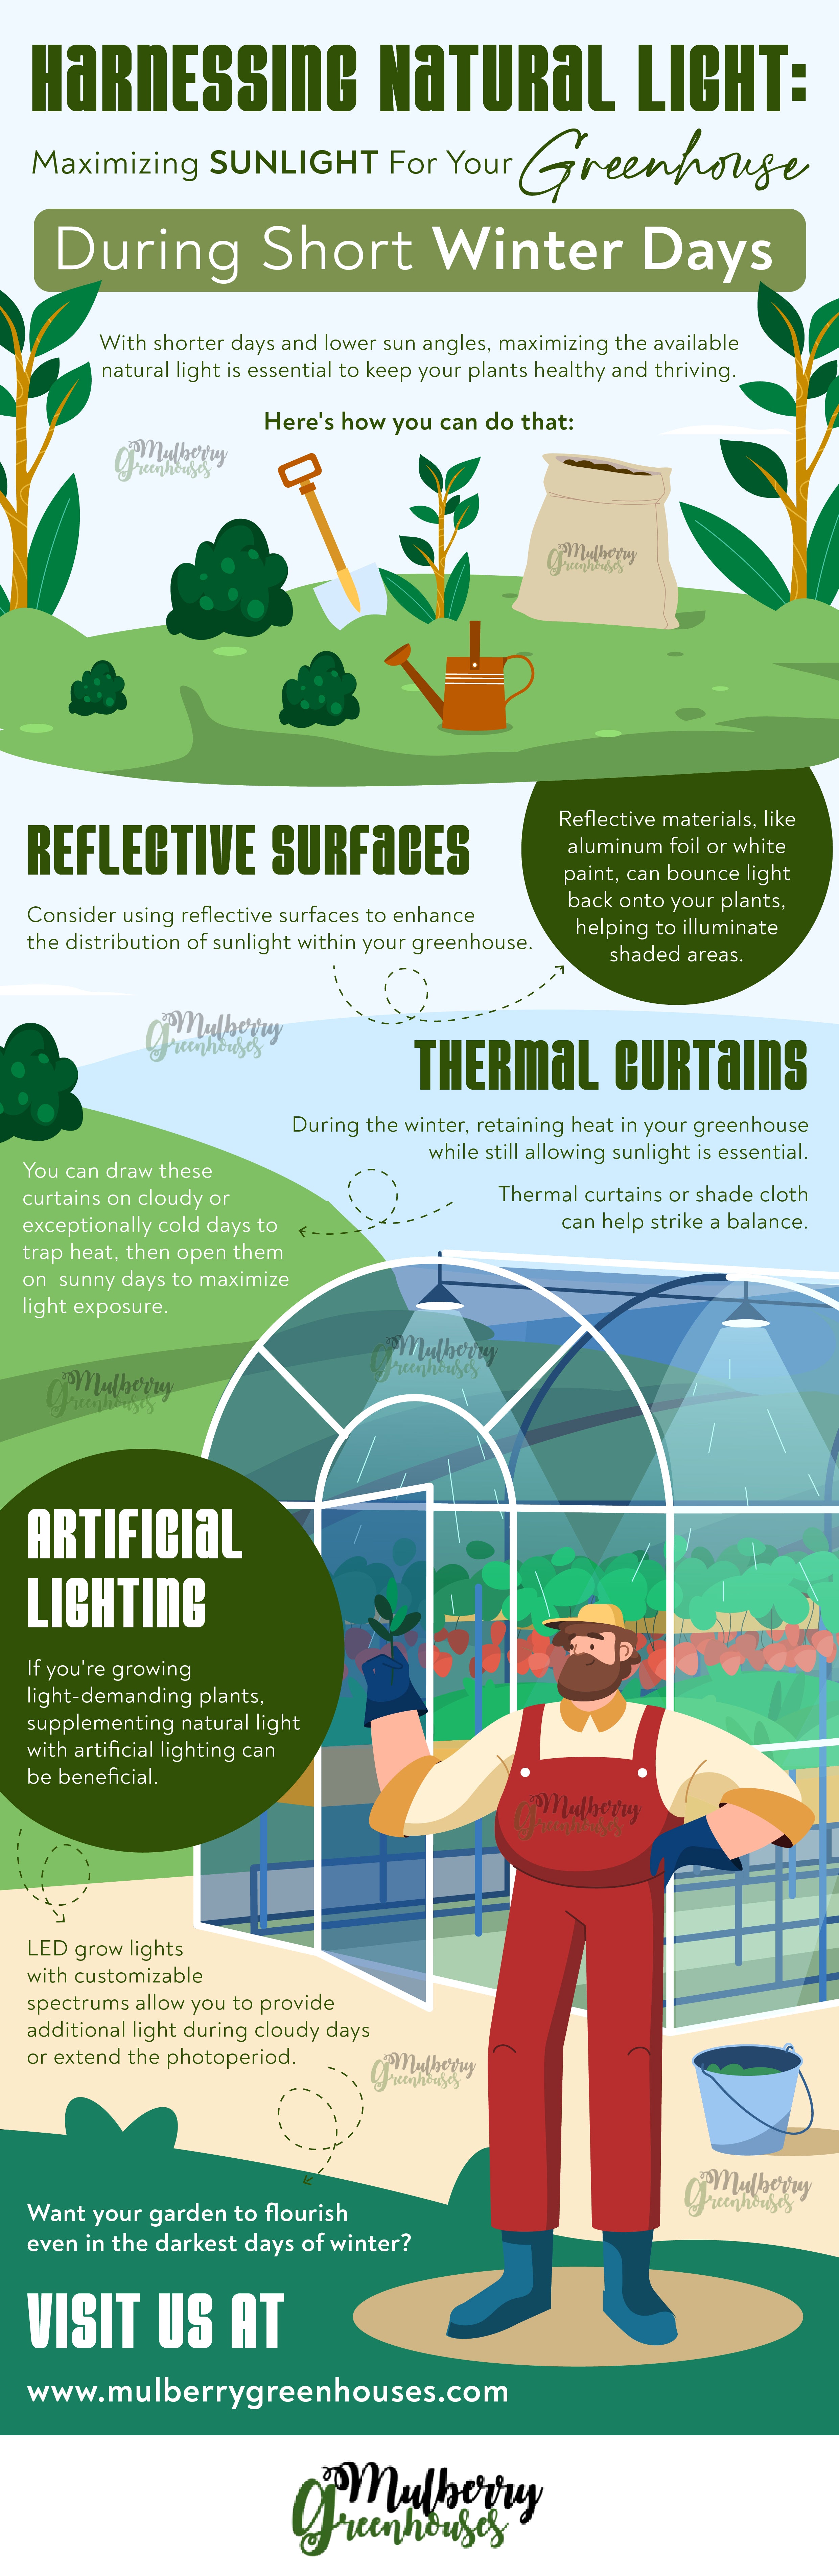 Harnessing Natural Light: Maximizing Sunlight for Your Greenhouse During Short Winter Days - Infograph